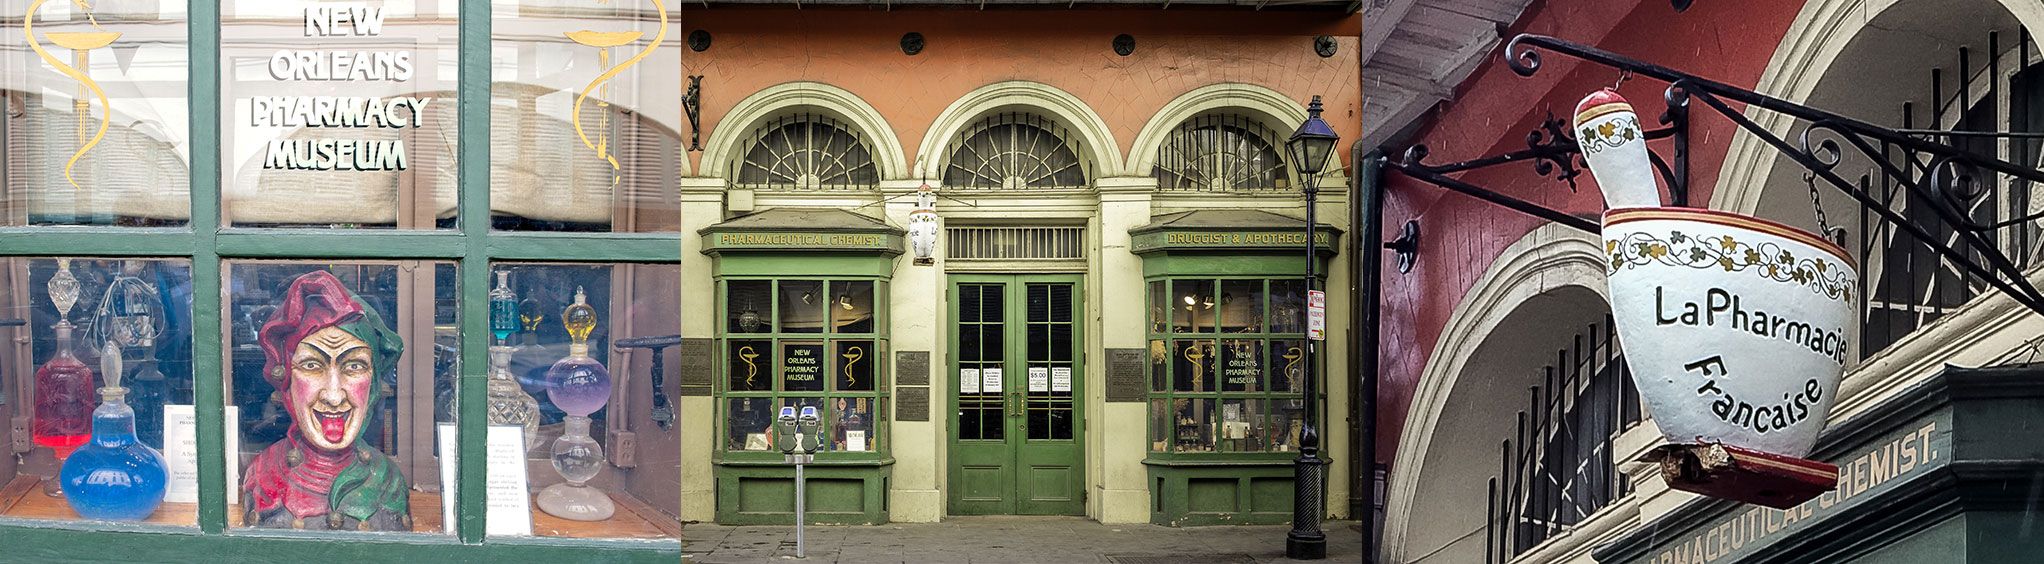 New Orleans Pharmacy Museum in New Orleans, LA